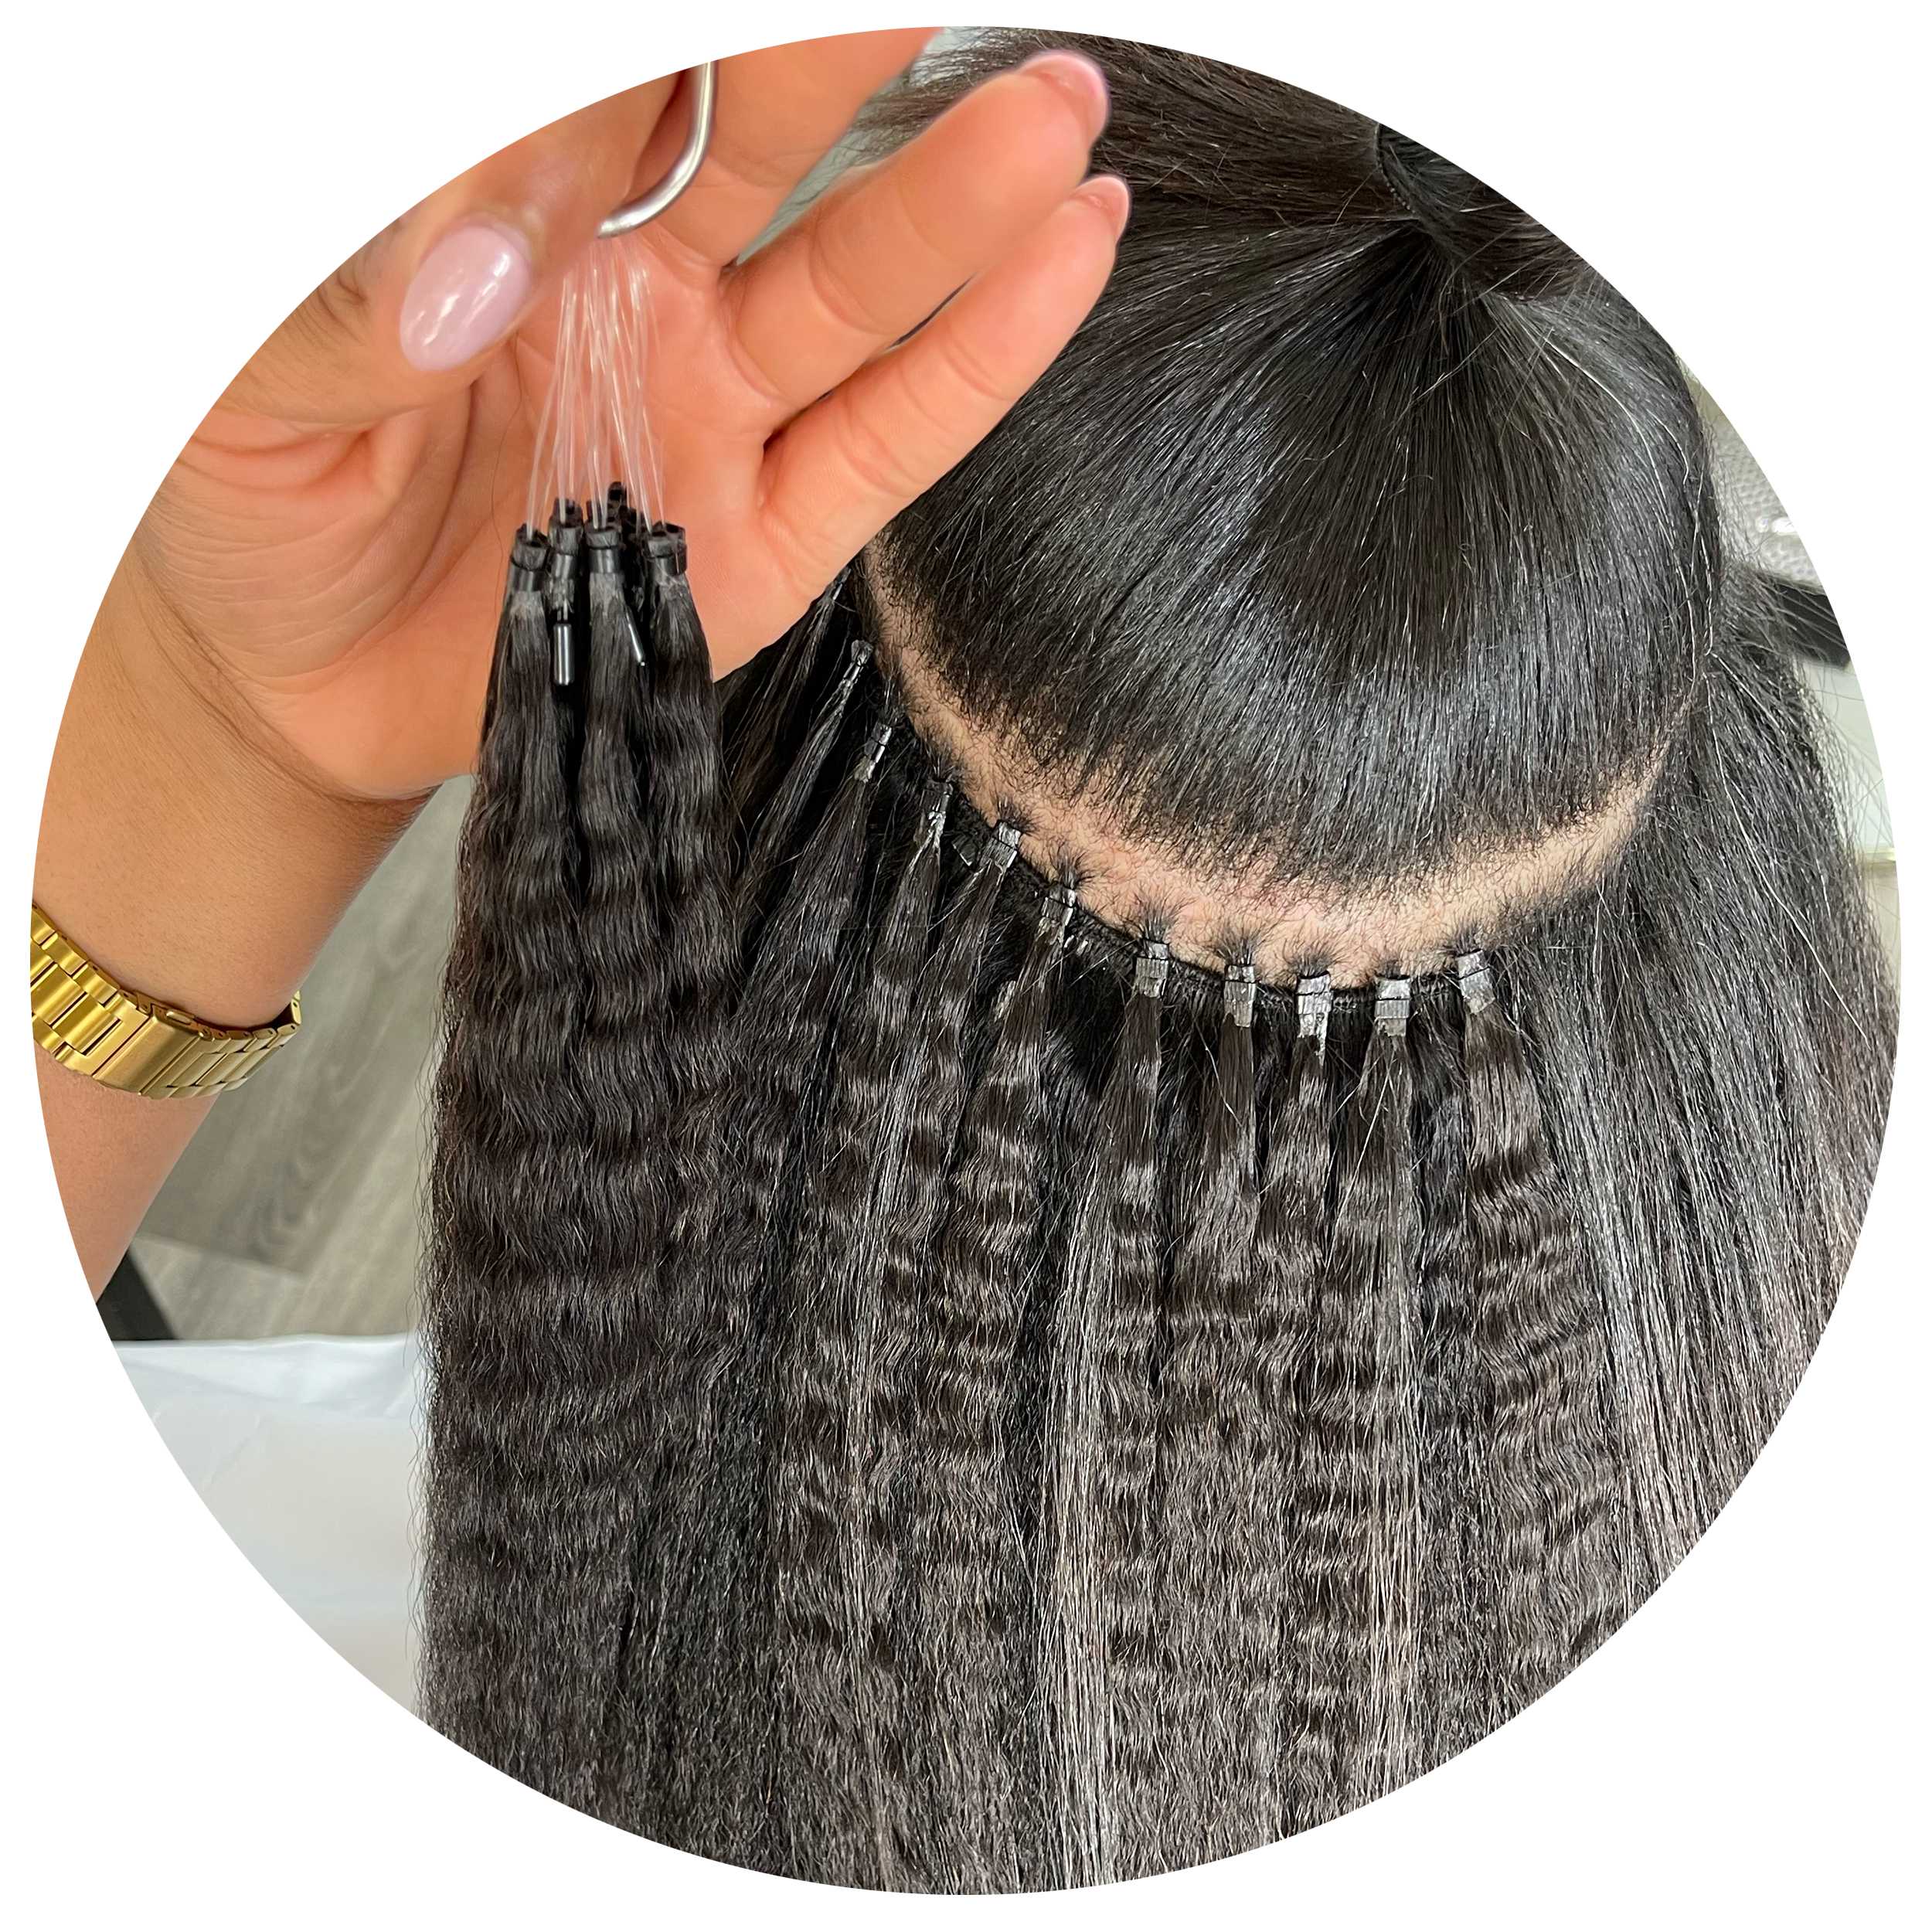 TruTip™ (I-Tip) Relaxed Natural Micro Loop Hair Extensions Order Now! –  True and Pure Texture